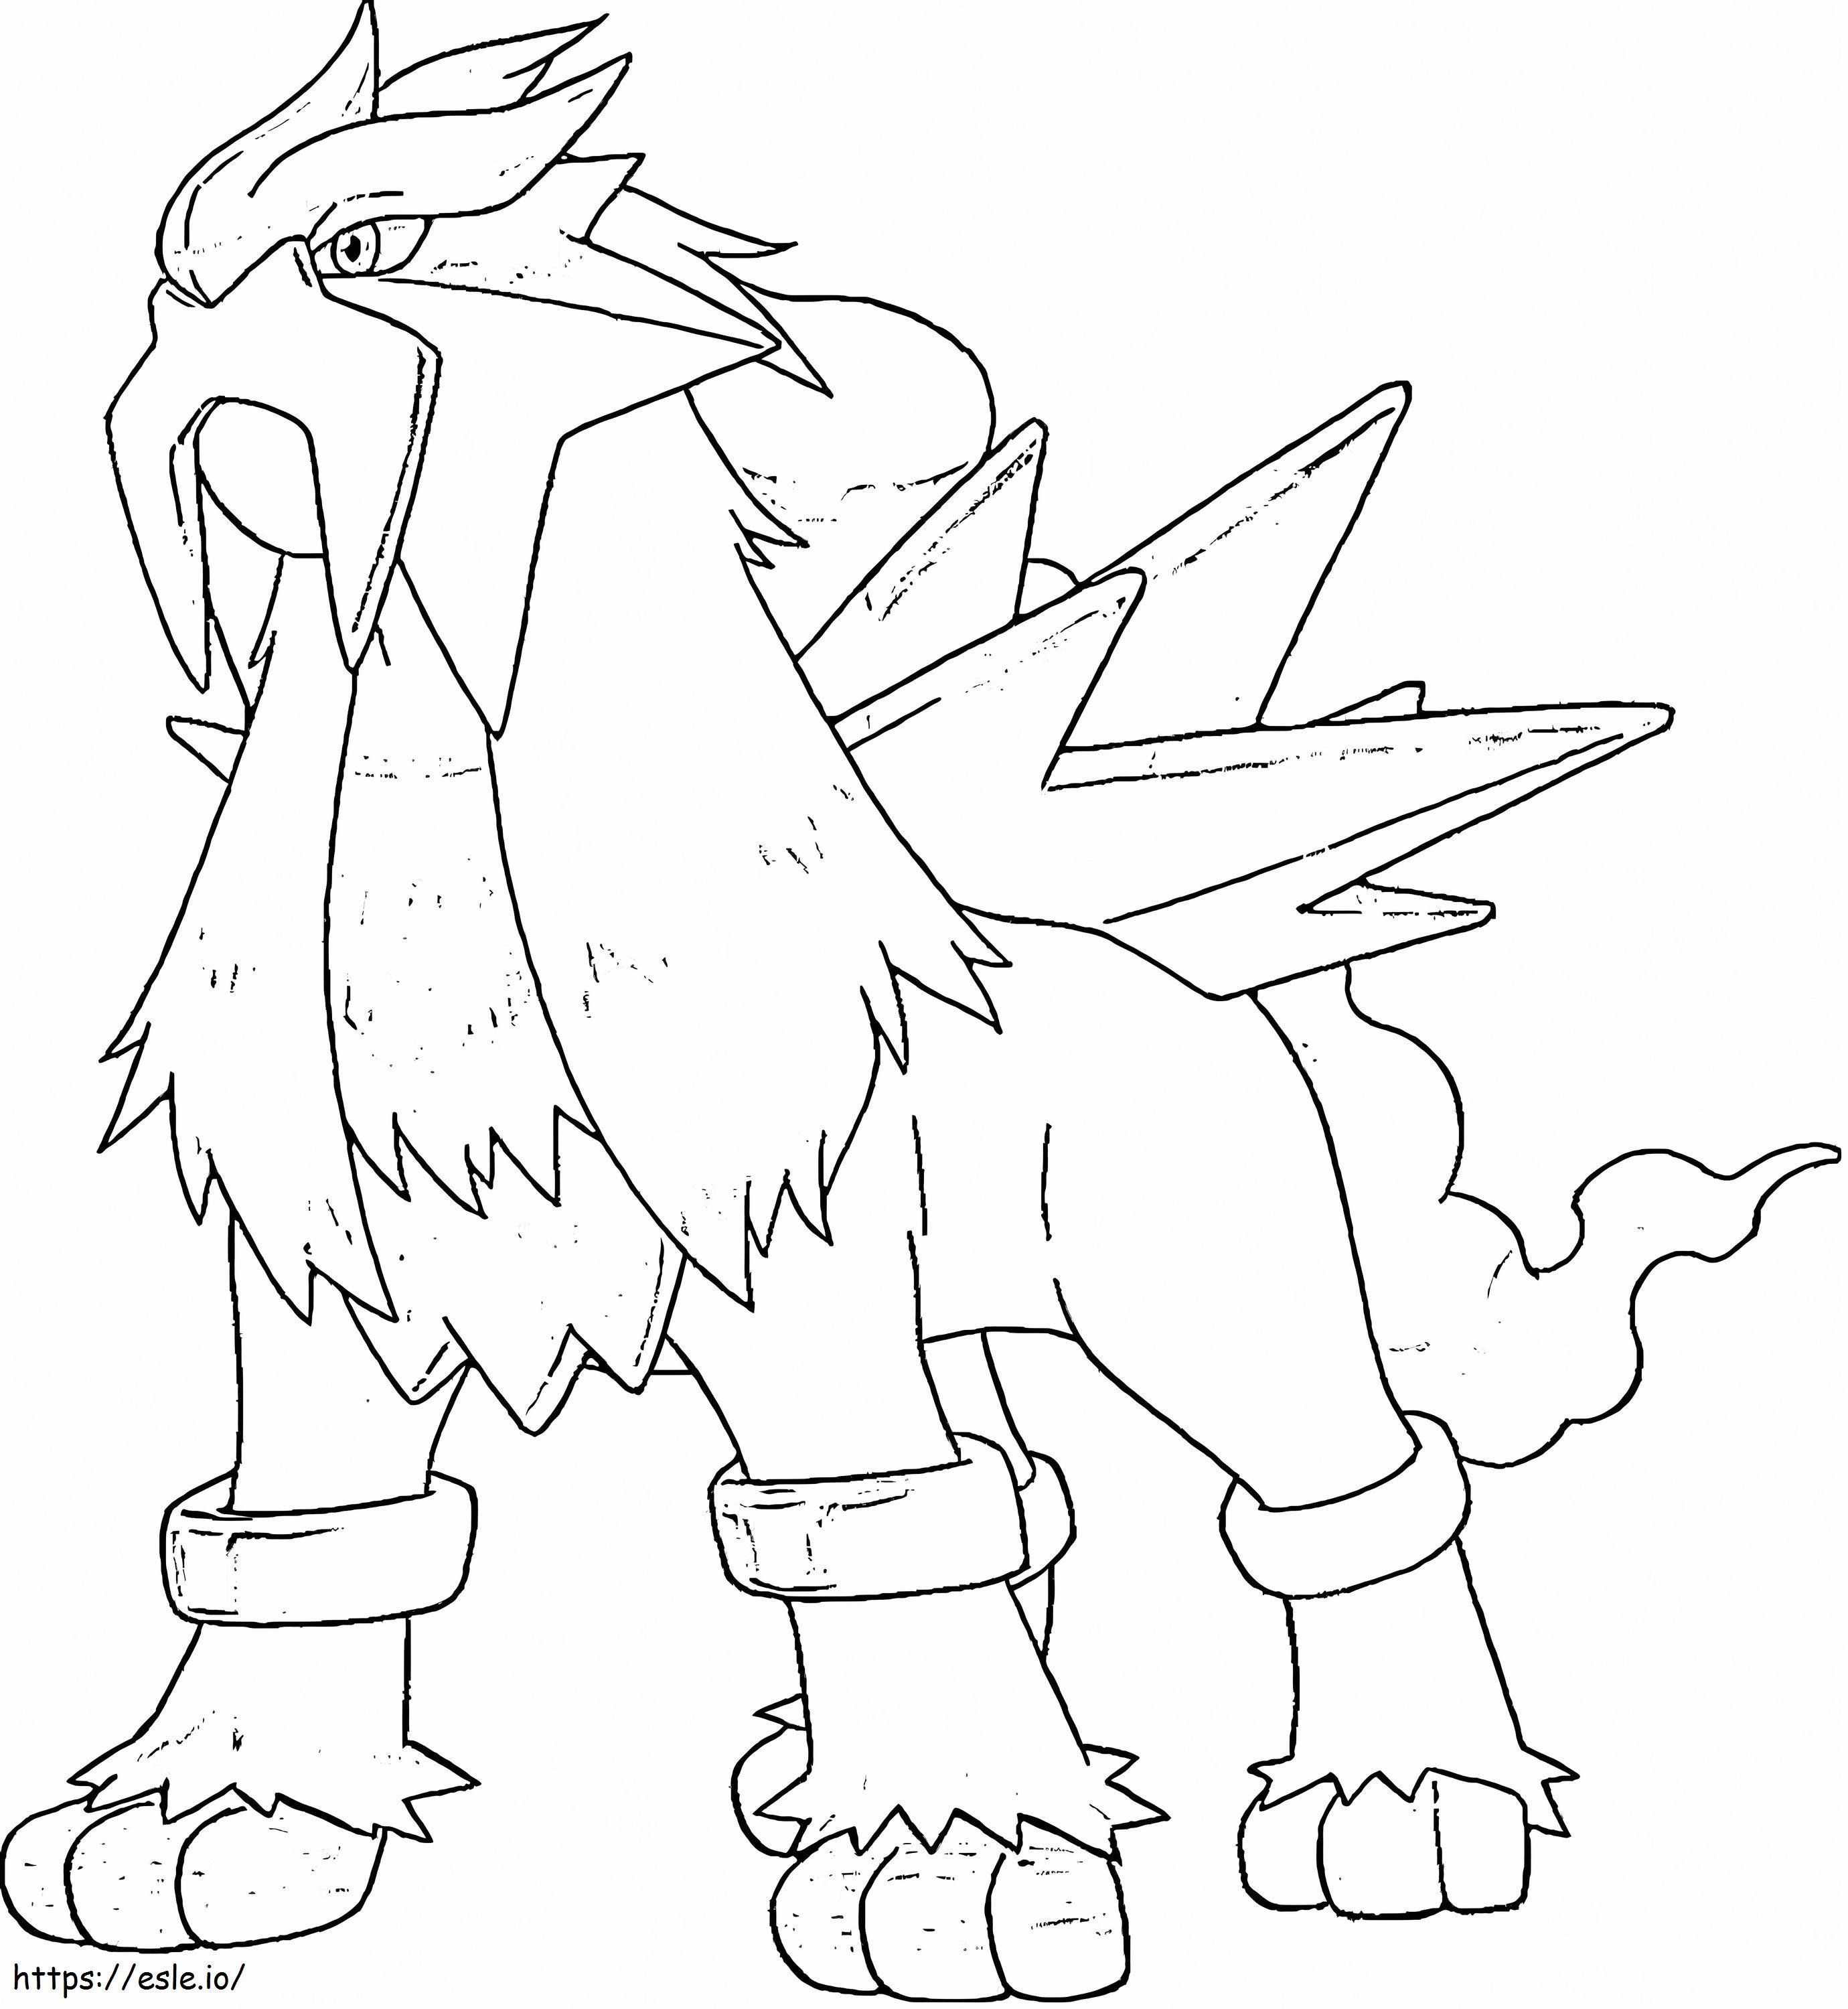 Entei In Legendary Pokemon coloring page